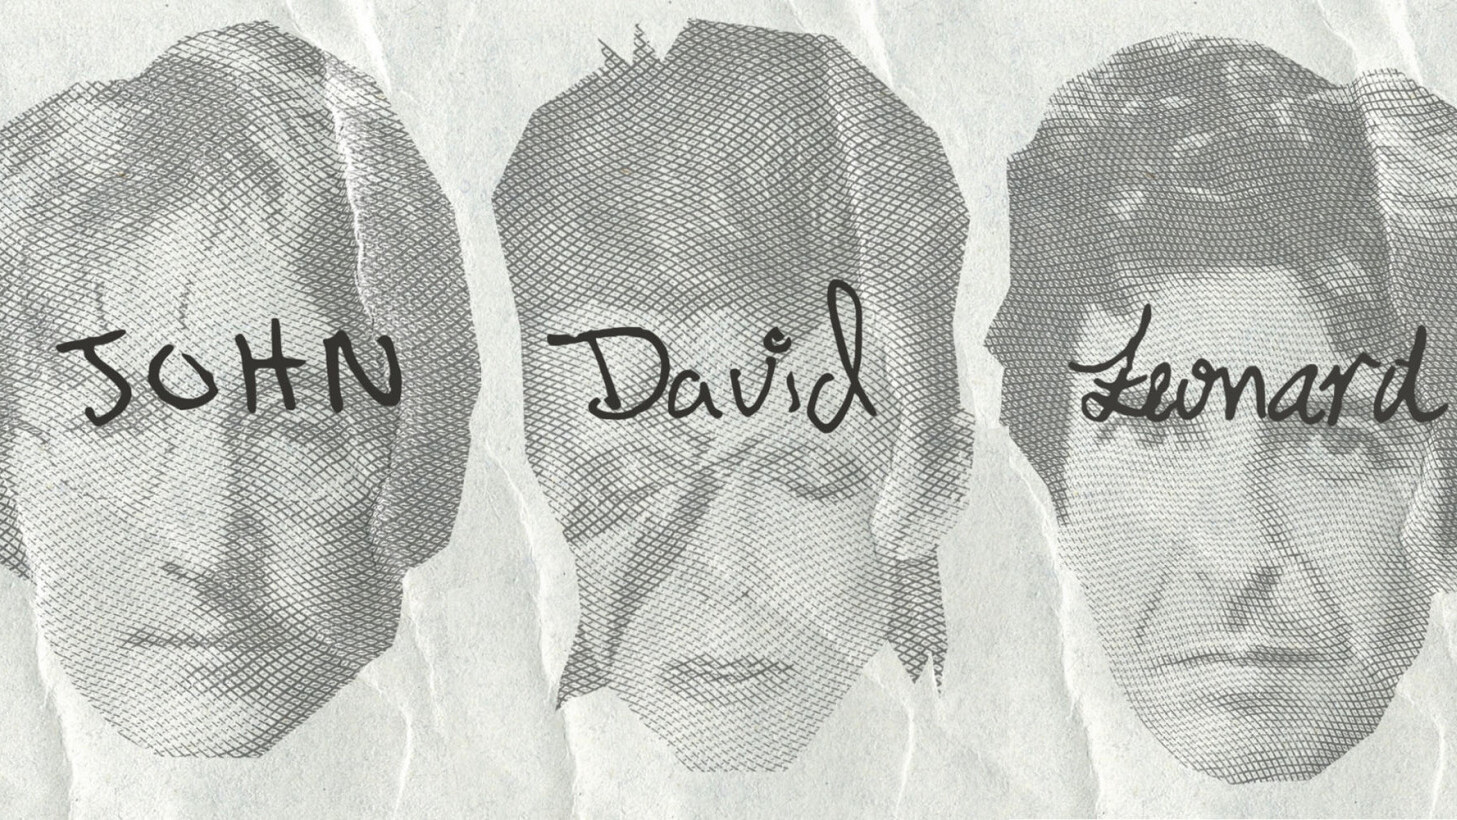 These free fonts let you write like David Bowie, John Lennon, and other music legends